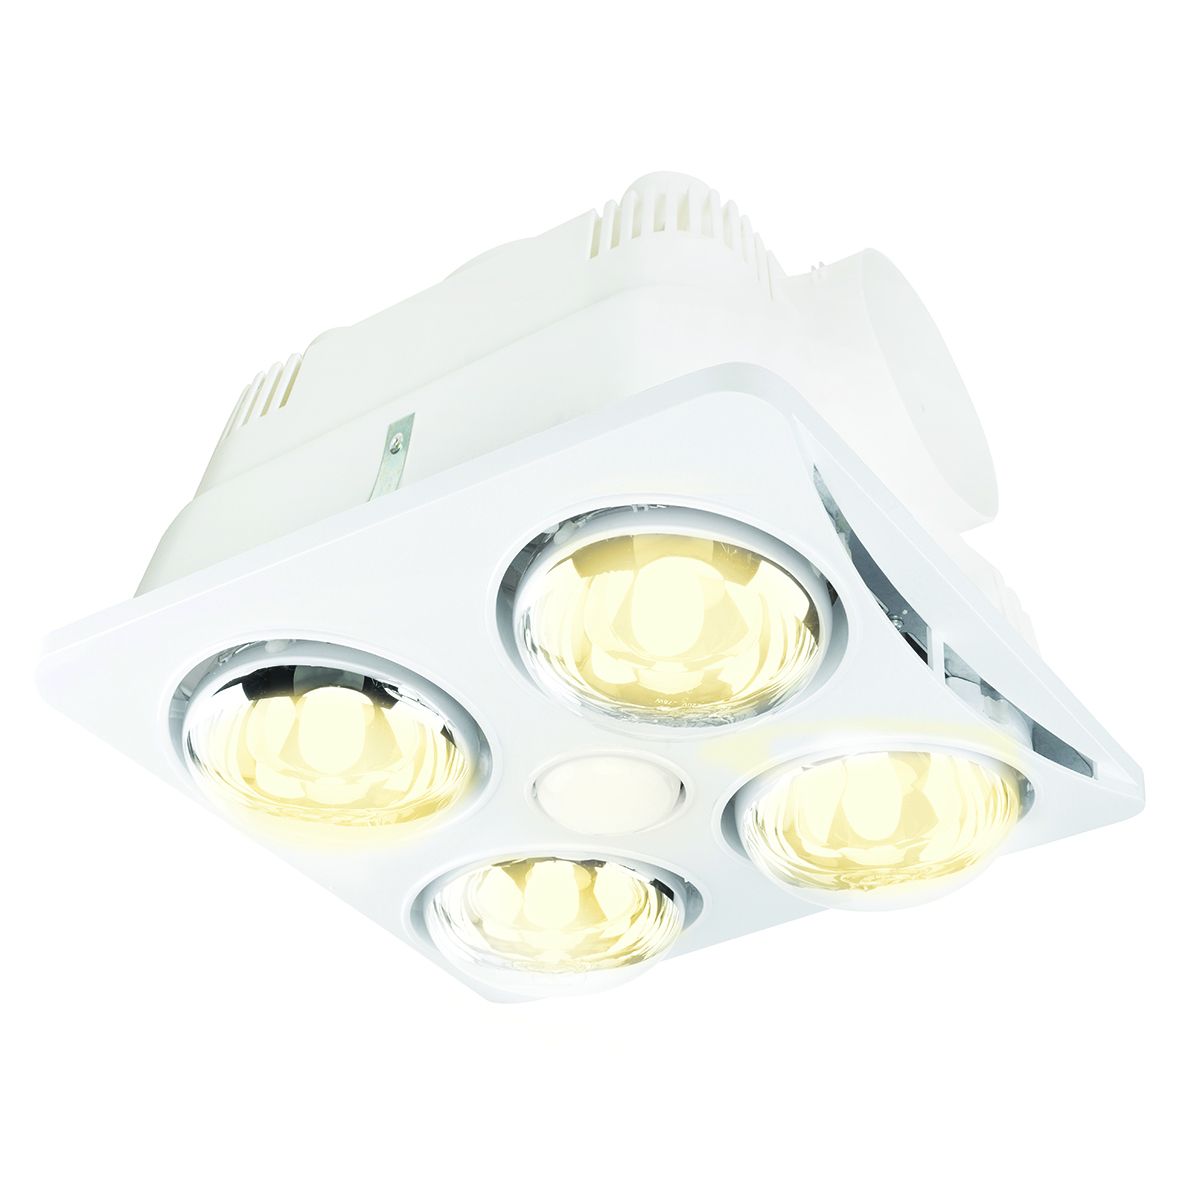 Brilliant 3 In 1 NEWTON Bathroom Heater Lamp Light & Exhaust Fan With 4 Heat & 1 LED Light & Complete Ducting Kit White